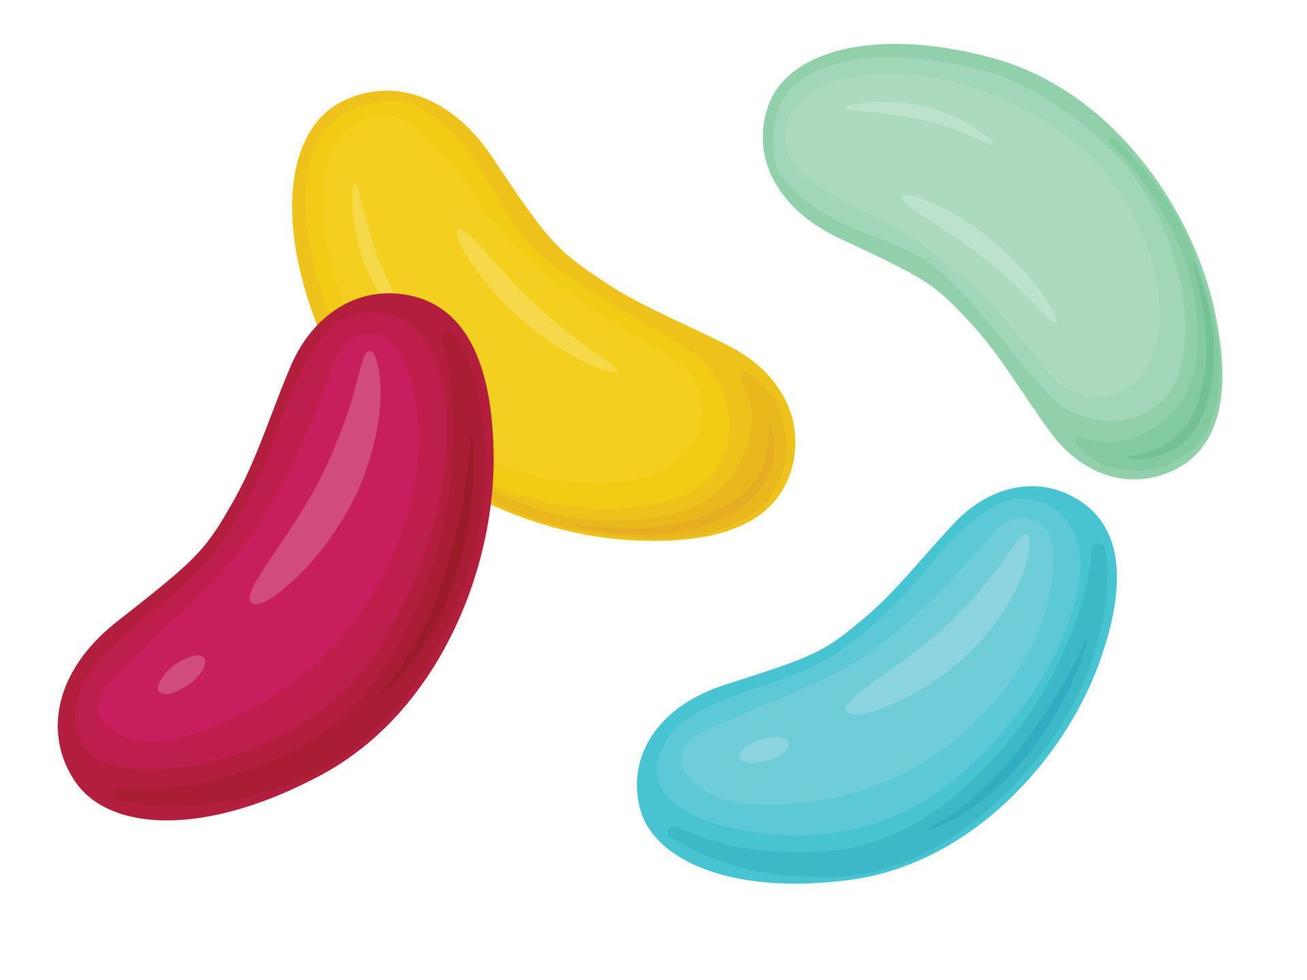 Jelly beans. Gummy sweet kids candies. Sweet and sour Snack. vector